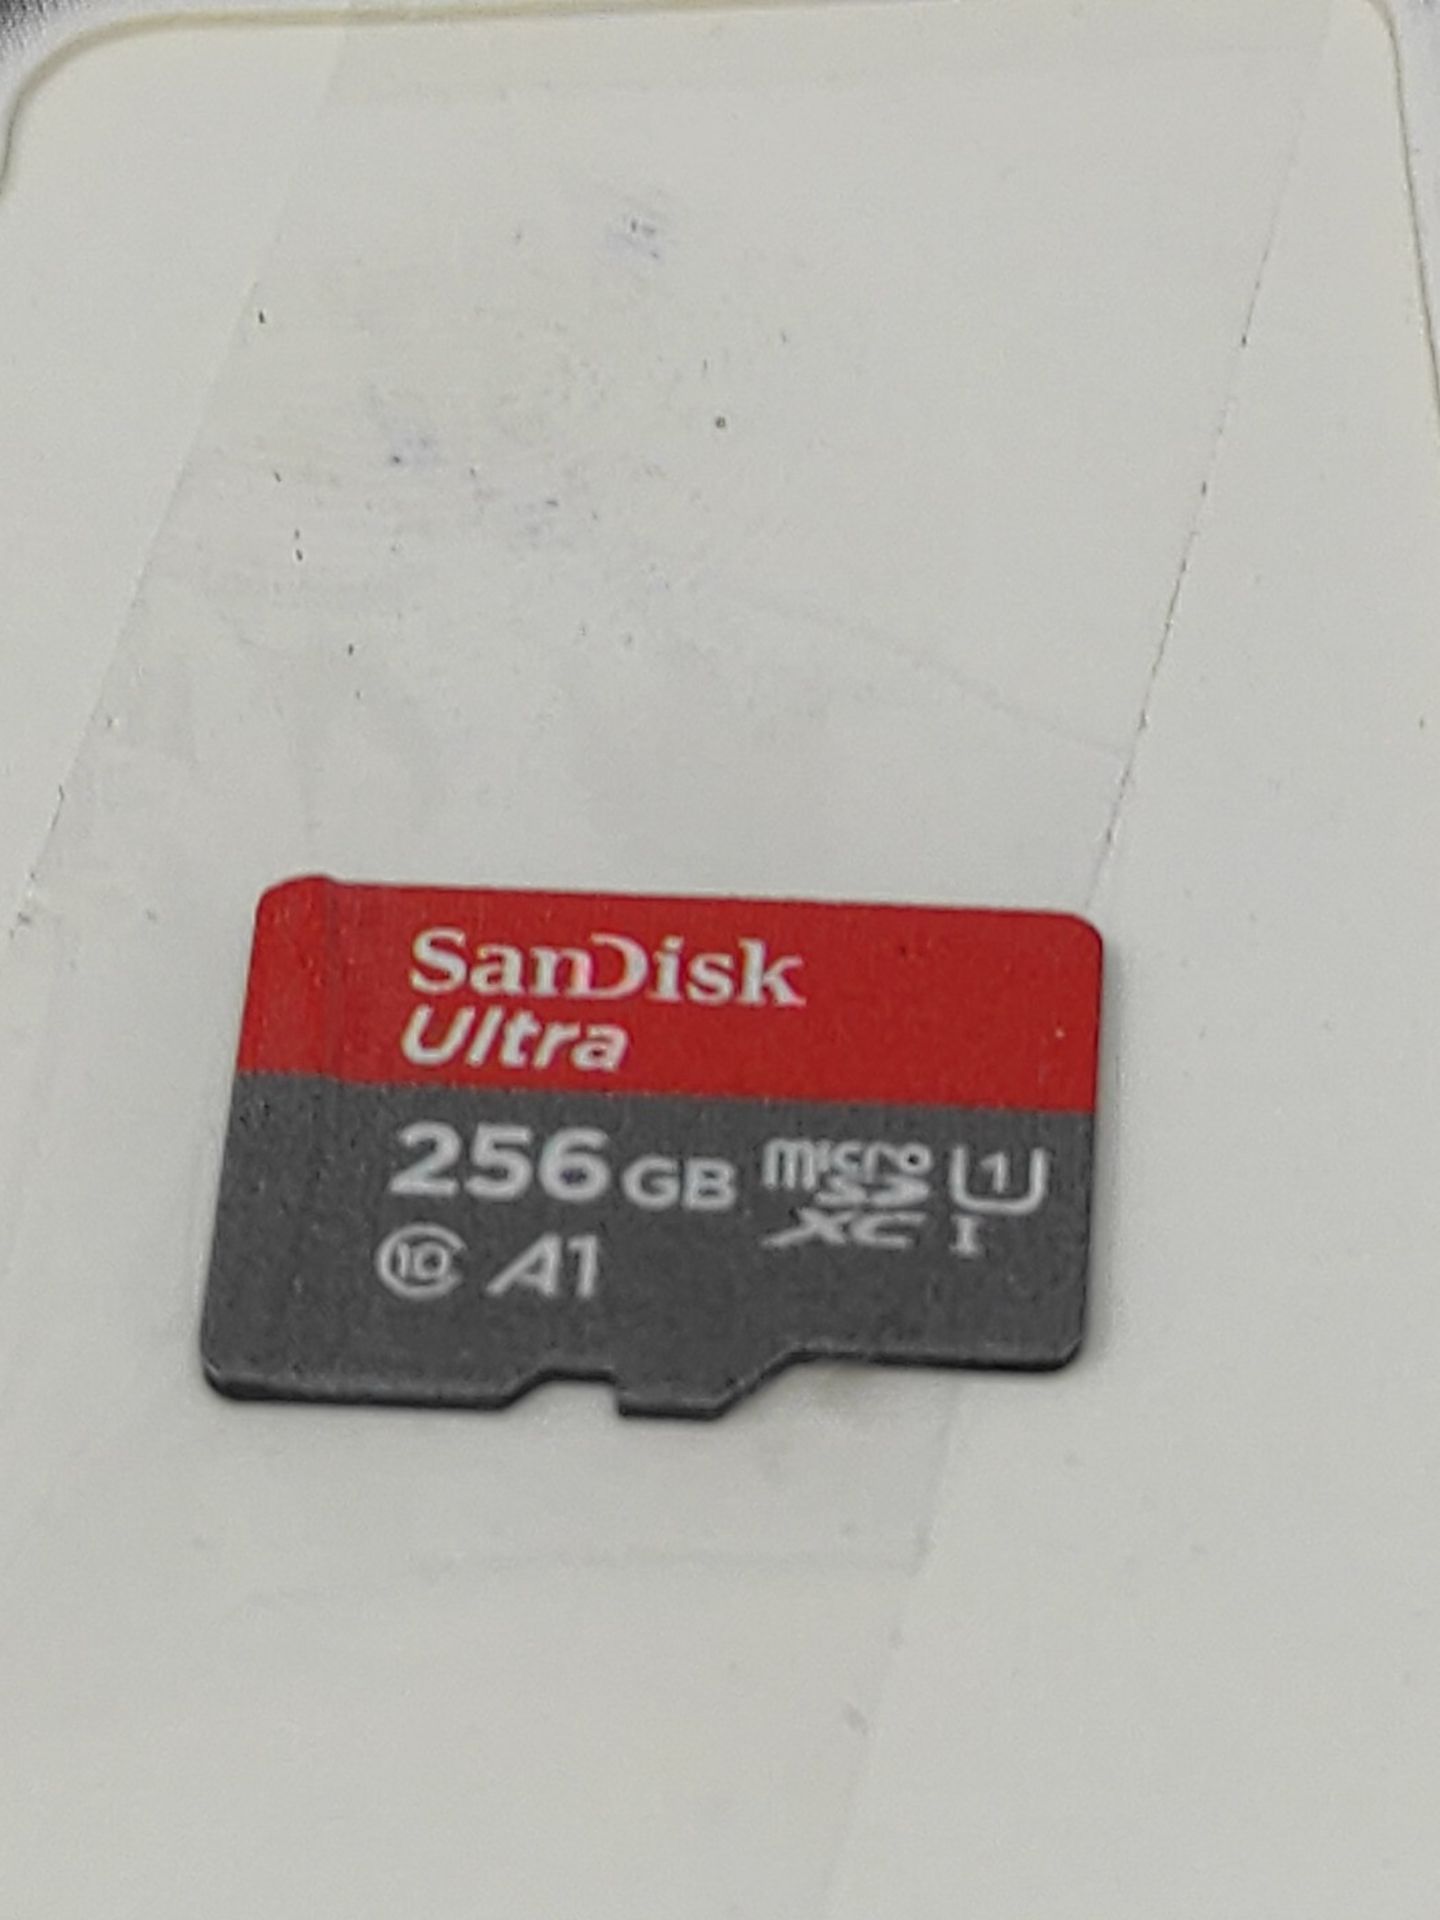 SanDisk Ultra Android microSDXC UHS-I Memory Card 256GB + Adapter (For Smartphones and - Image 4 of 4